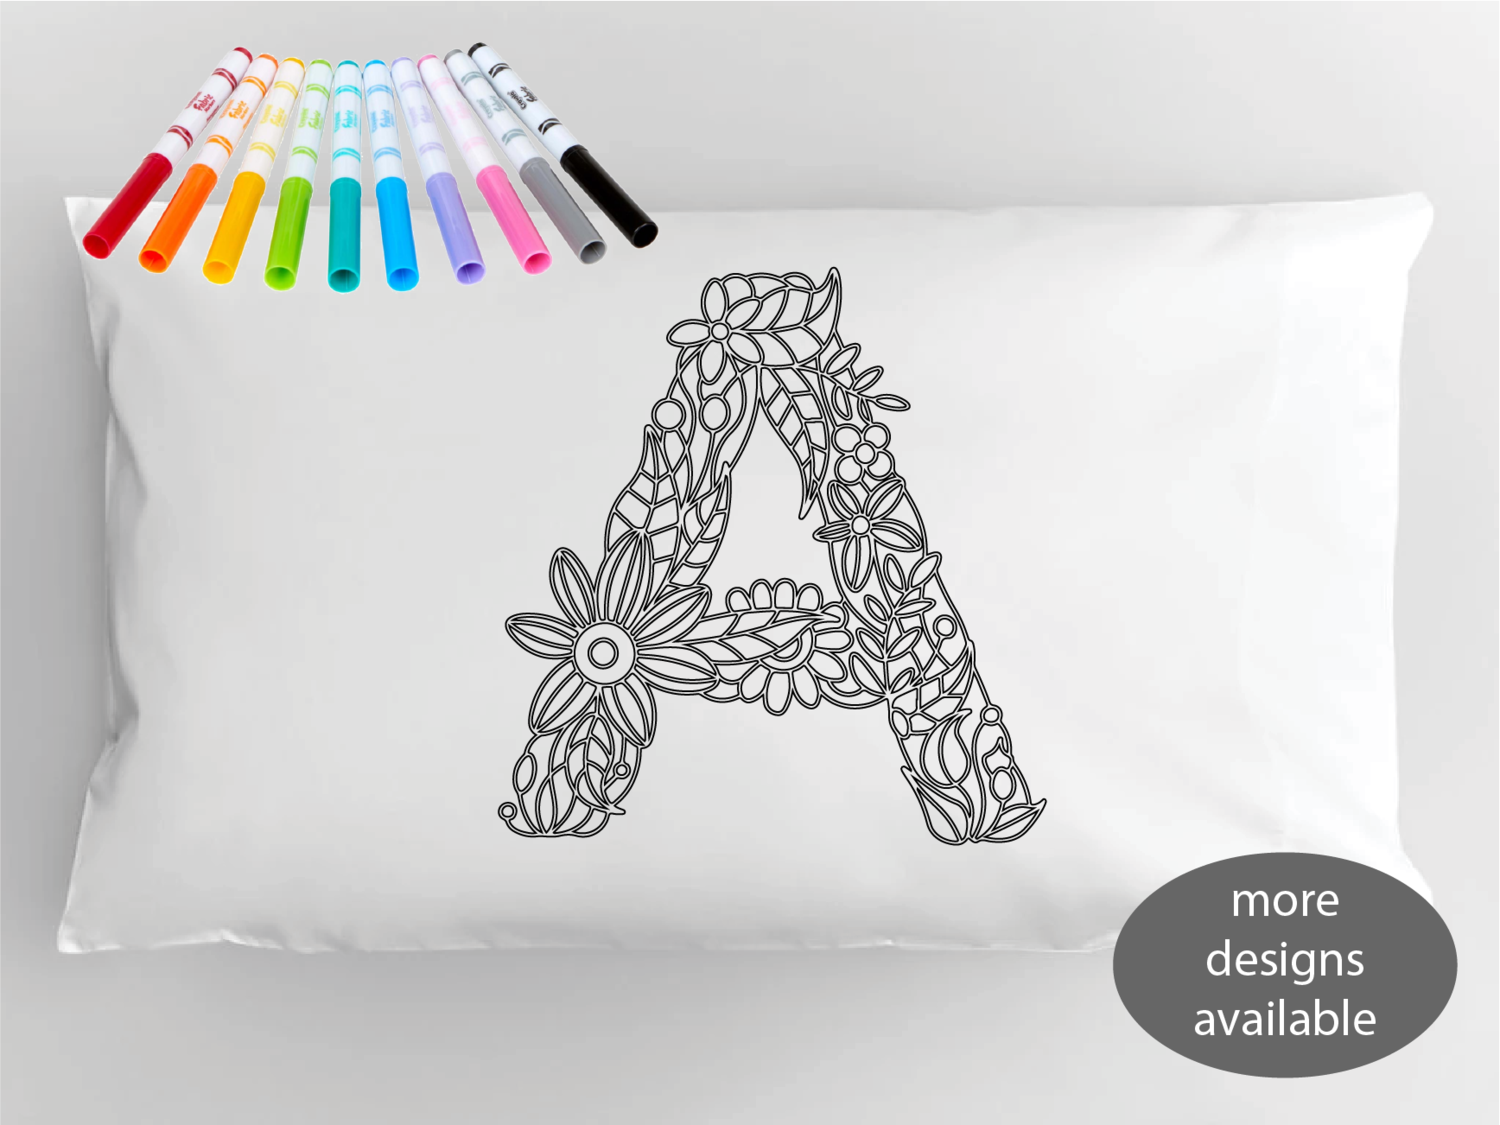 Color-In Your Own Personalized Pillowcase, 20"x29